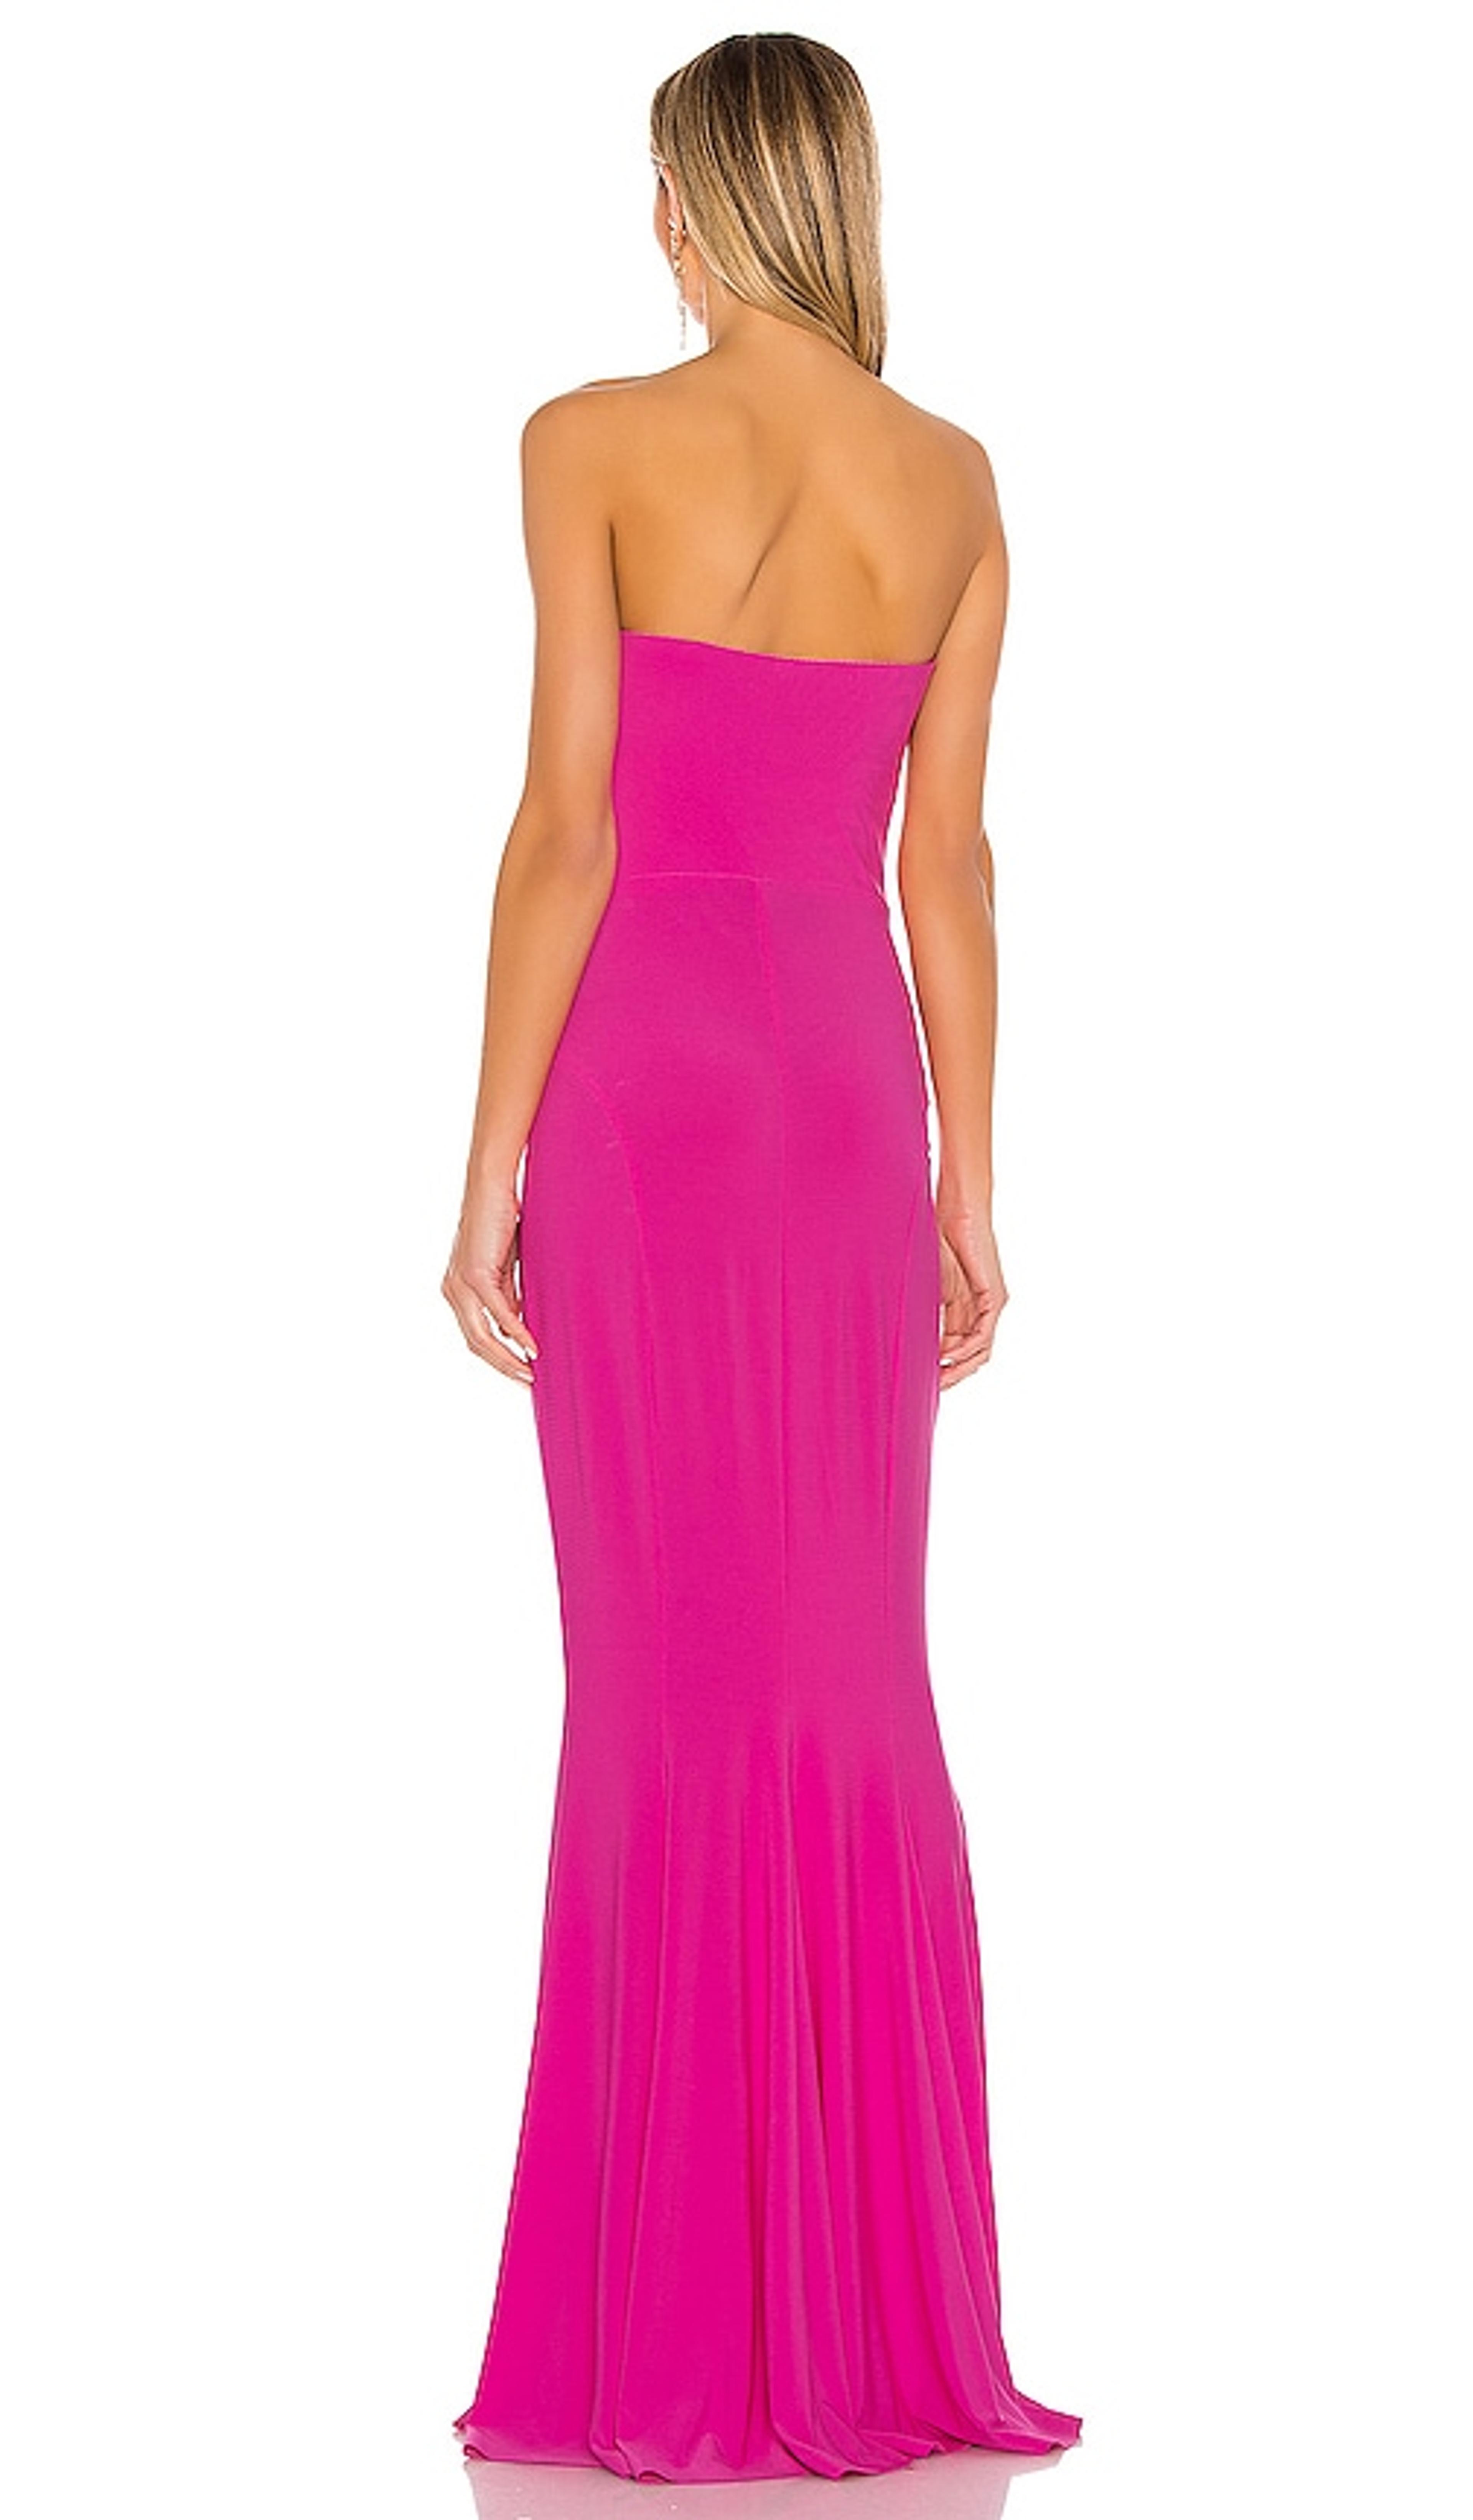 Norma Kamali X REVOLVE Strapless Fishtail Gown in Orchid Pink | REVOLVE